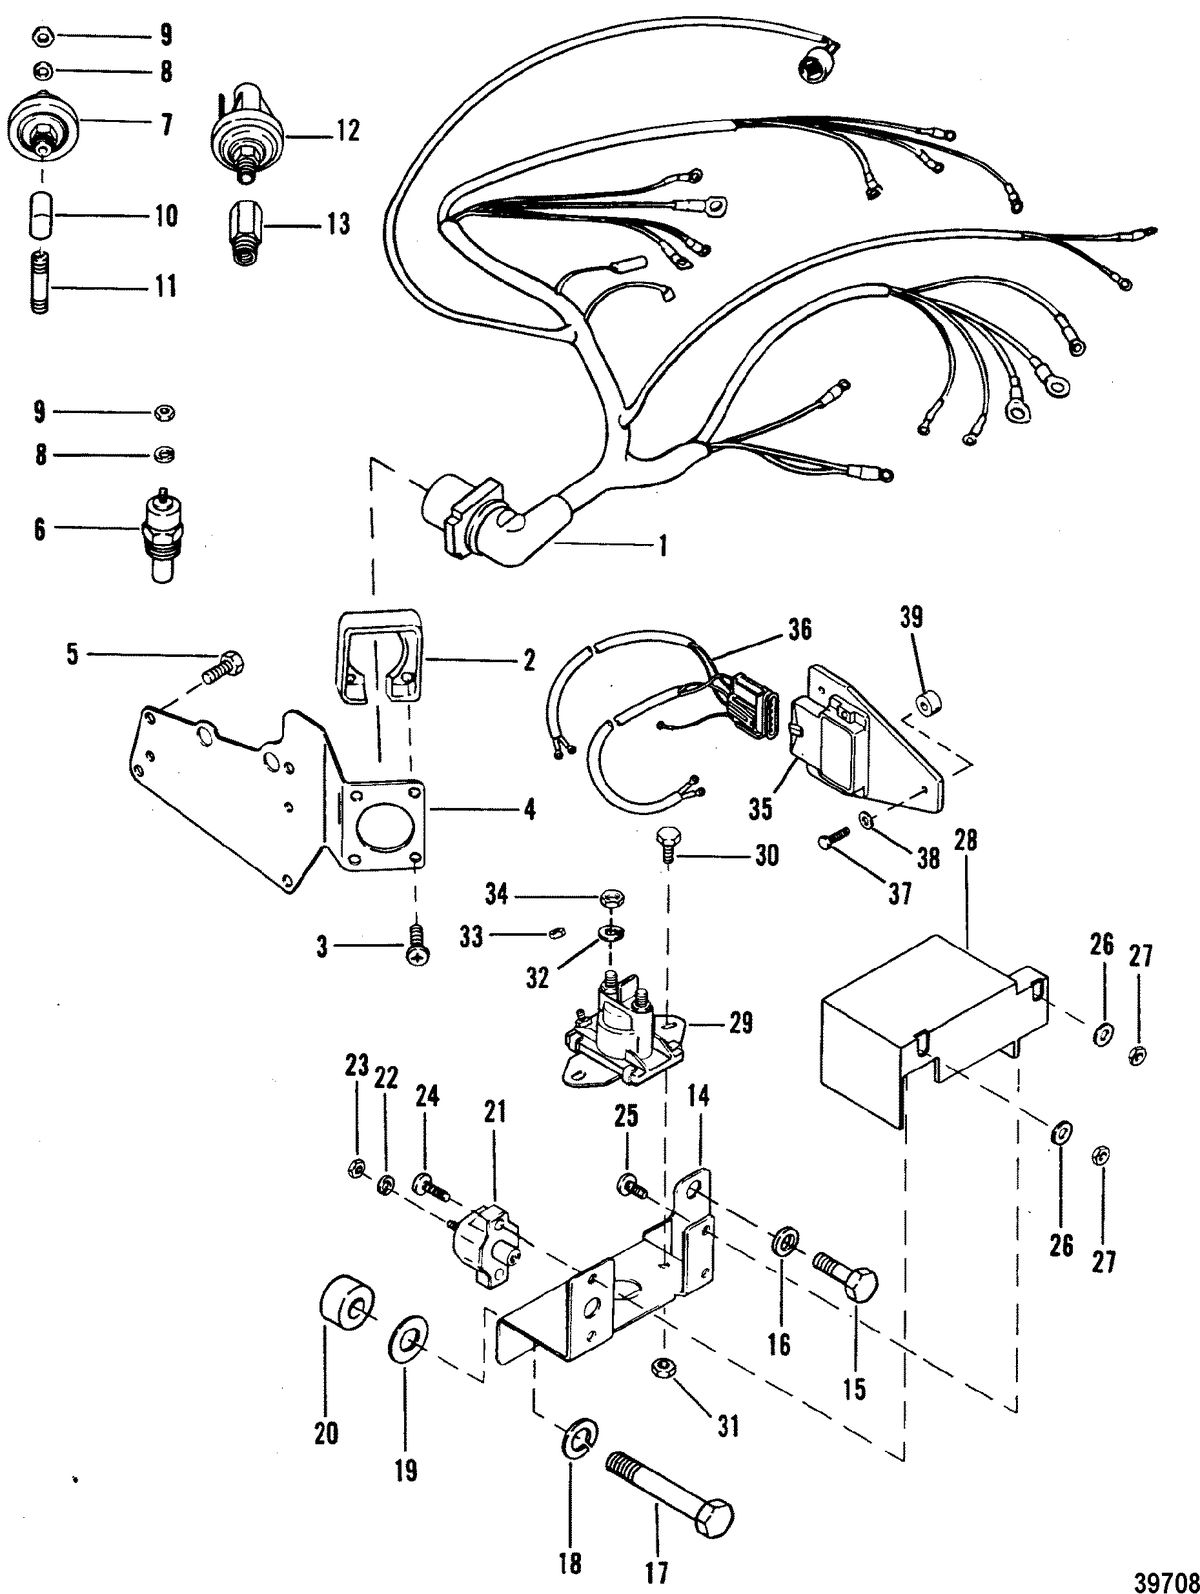 MERCRUISER 4.3L/4.3LX ALPHA ONE ENGINE (262 CID) WIRING HARNESS AND ELECTRICAL COMPONENTS